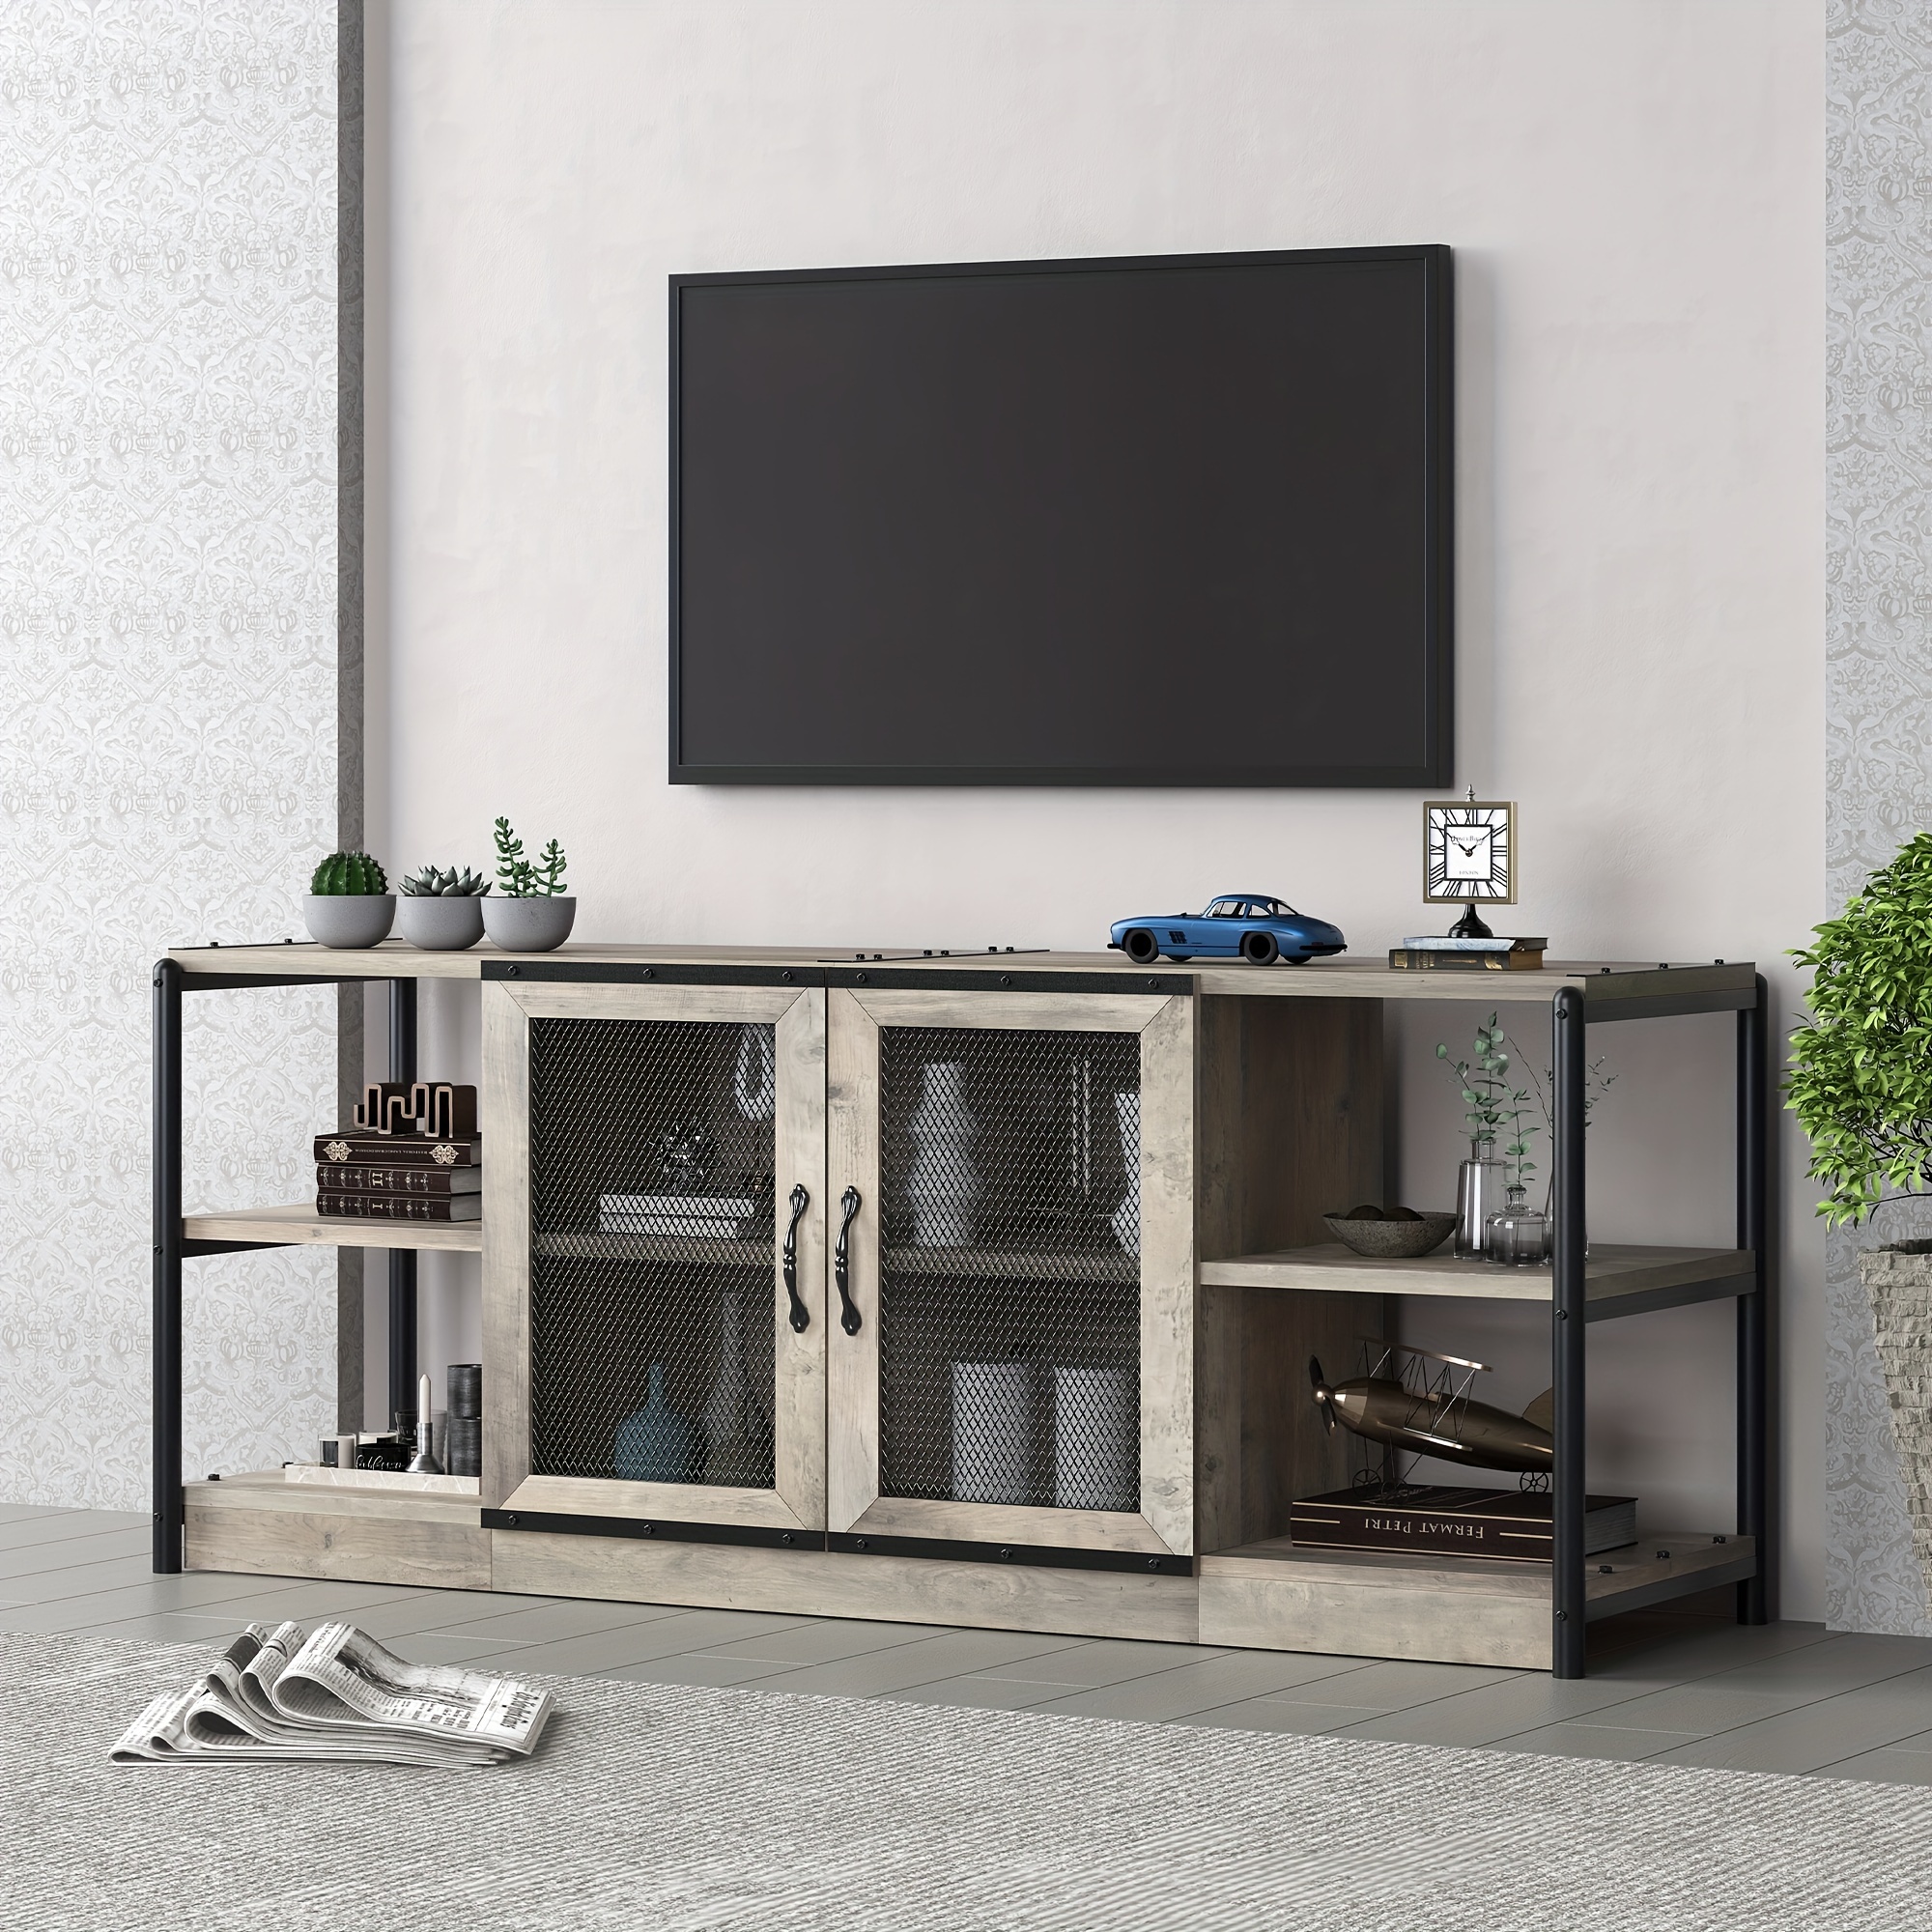 

Tv Stand For 65+ Inch Tv, Industrial Entertainment Center Tv Media Console Cabinet, Farmhouse Tv Stand With Storage And Mesh Door, Cabinet Furniture For Living Room (rustic Grey)